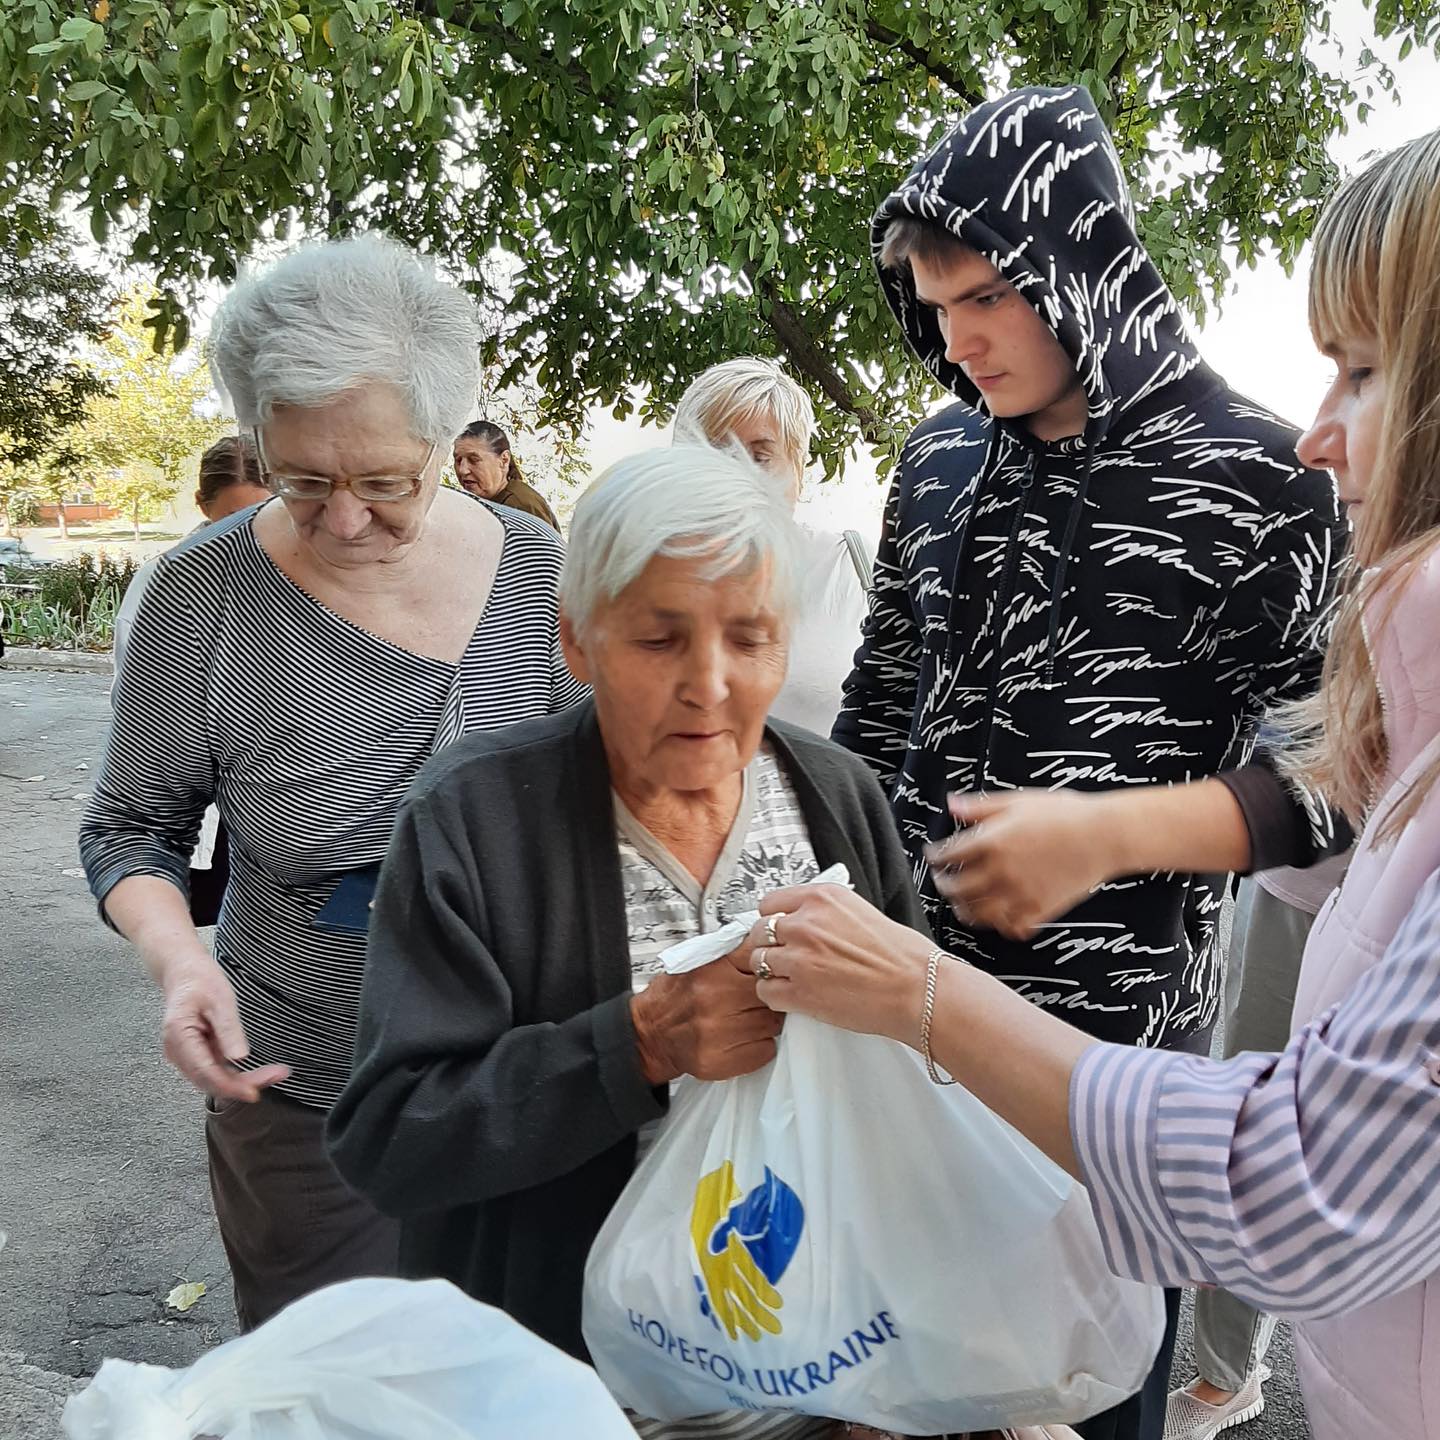 A group of people standing around an older woman with bags.